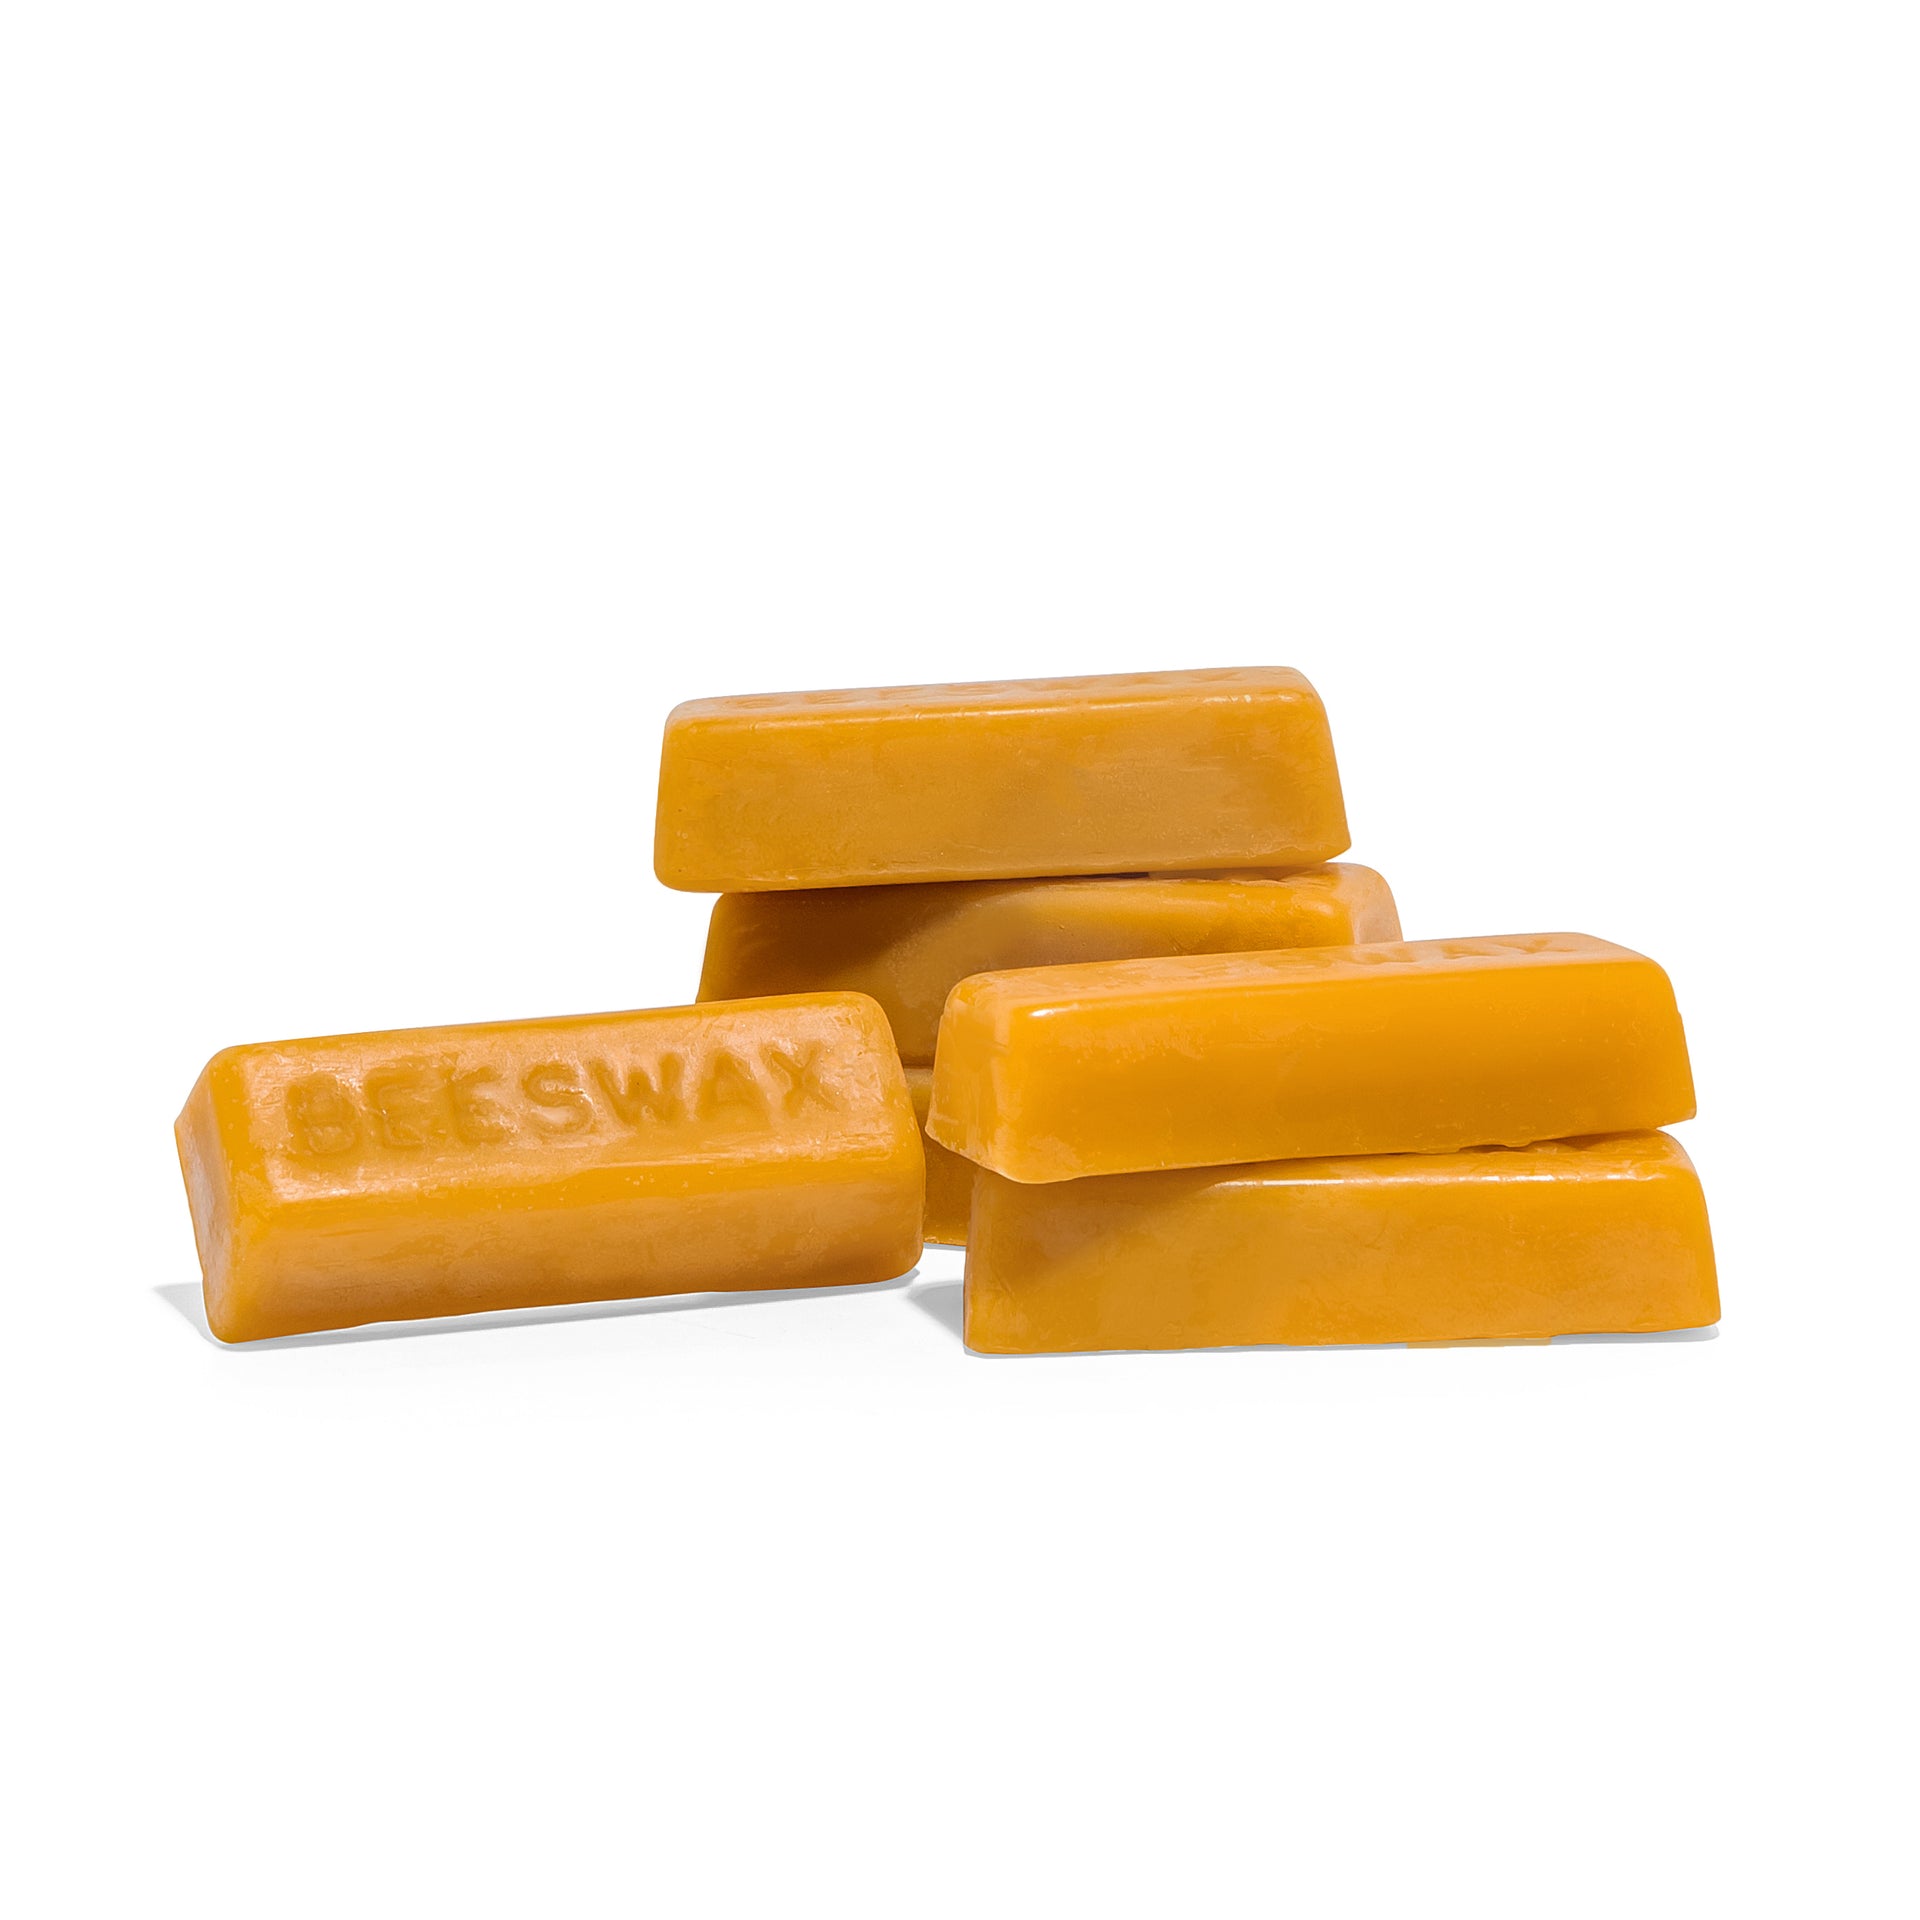 EricX Light Beeswax Bars 7oz,1oz for Each Beeswax Bars,Pack of 7 Beeswax  Bars Cosmetic